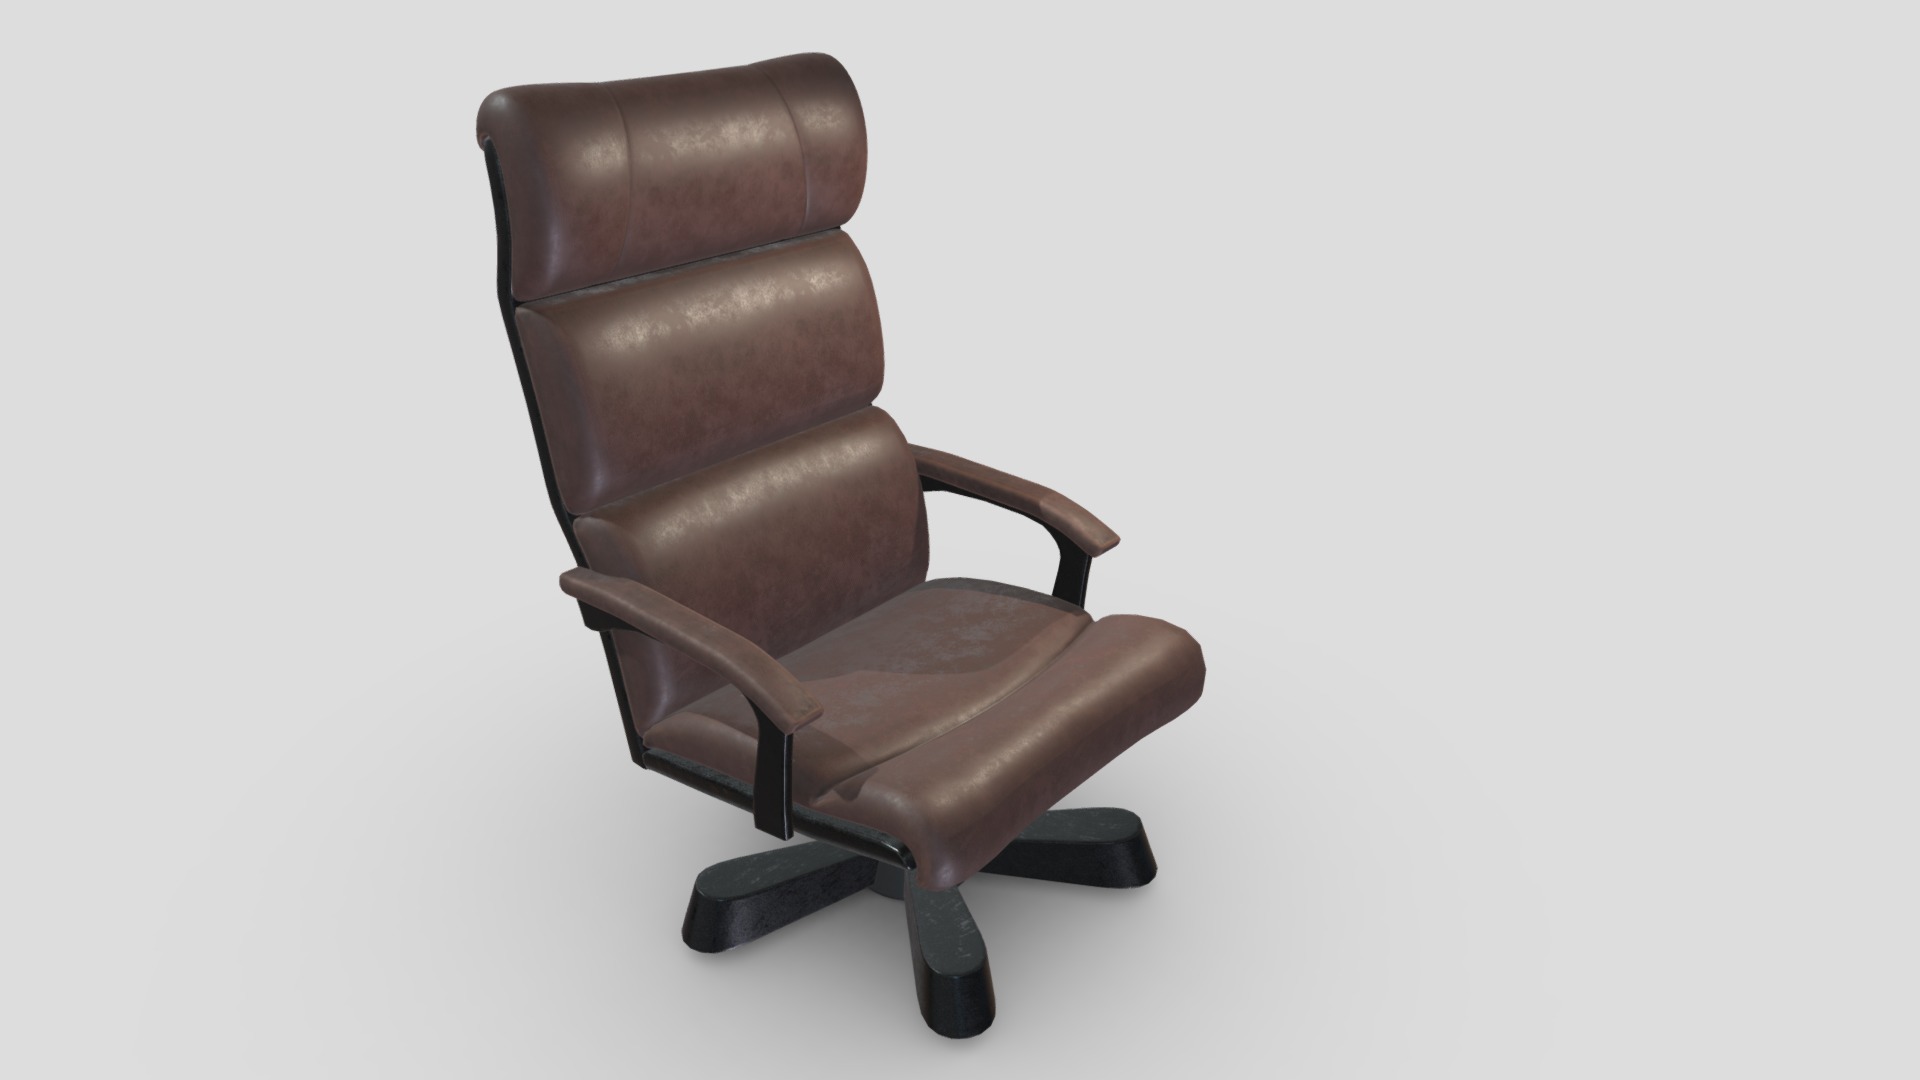 3D model Arm Chair 14 - This is a 3D model of the Arm Chair 14. The 3D model is about a brown leather chair.